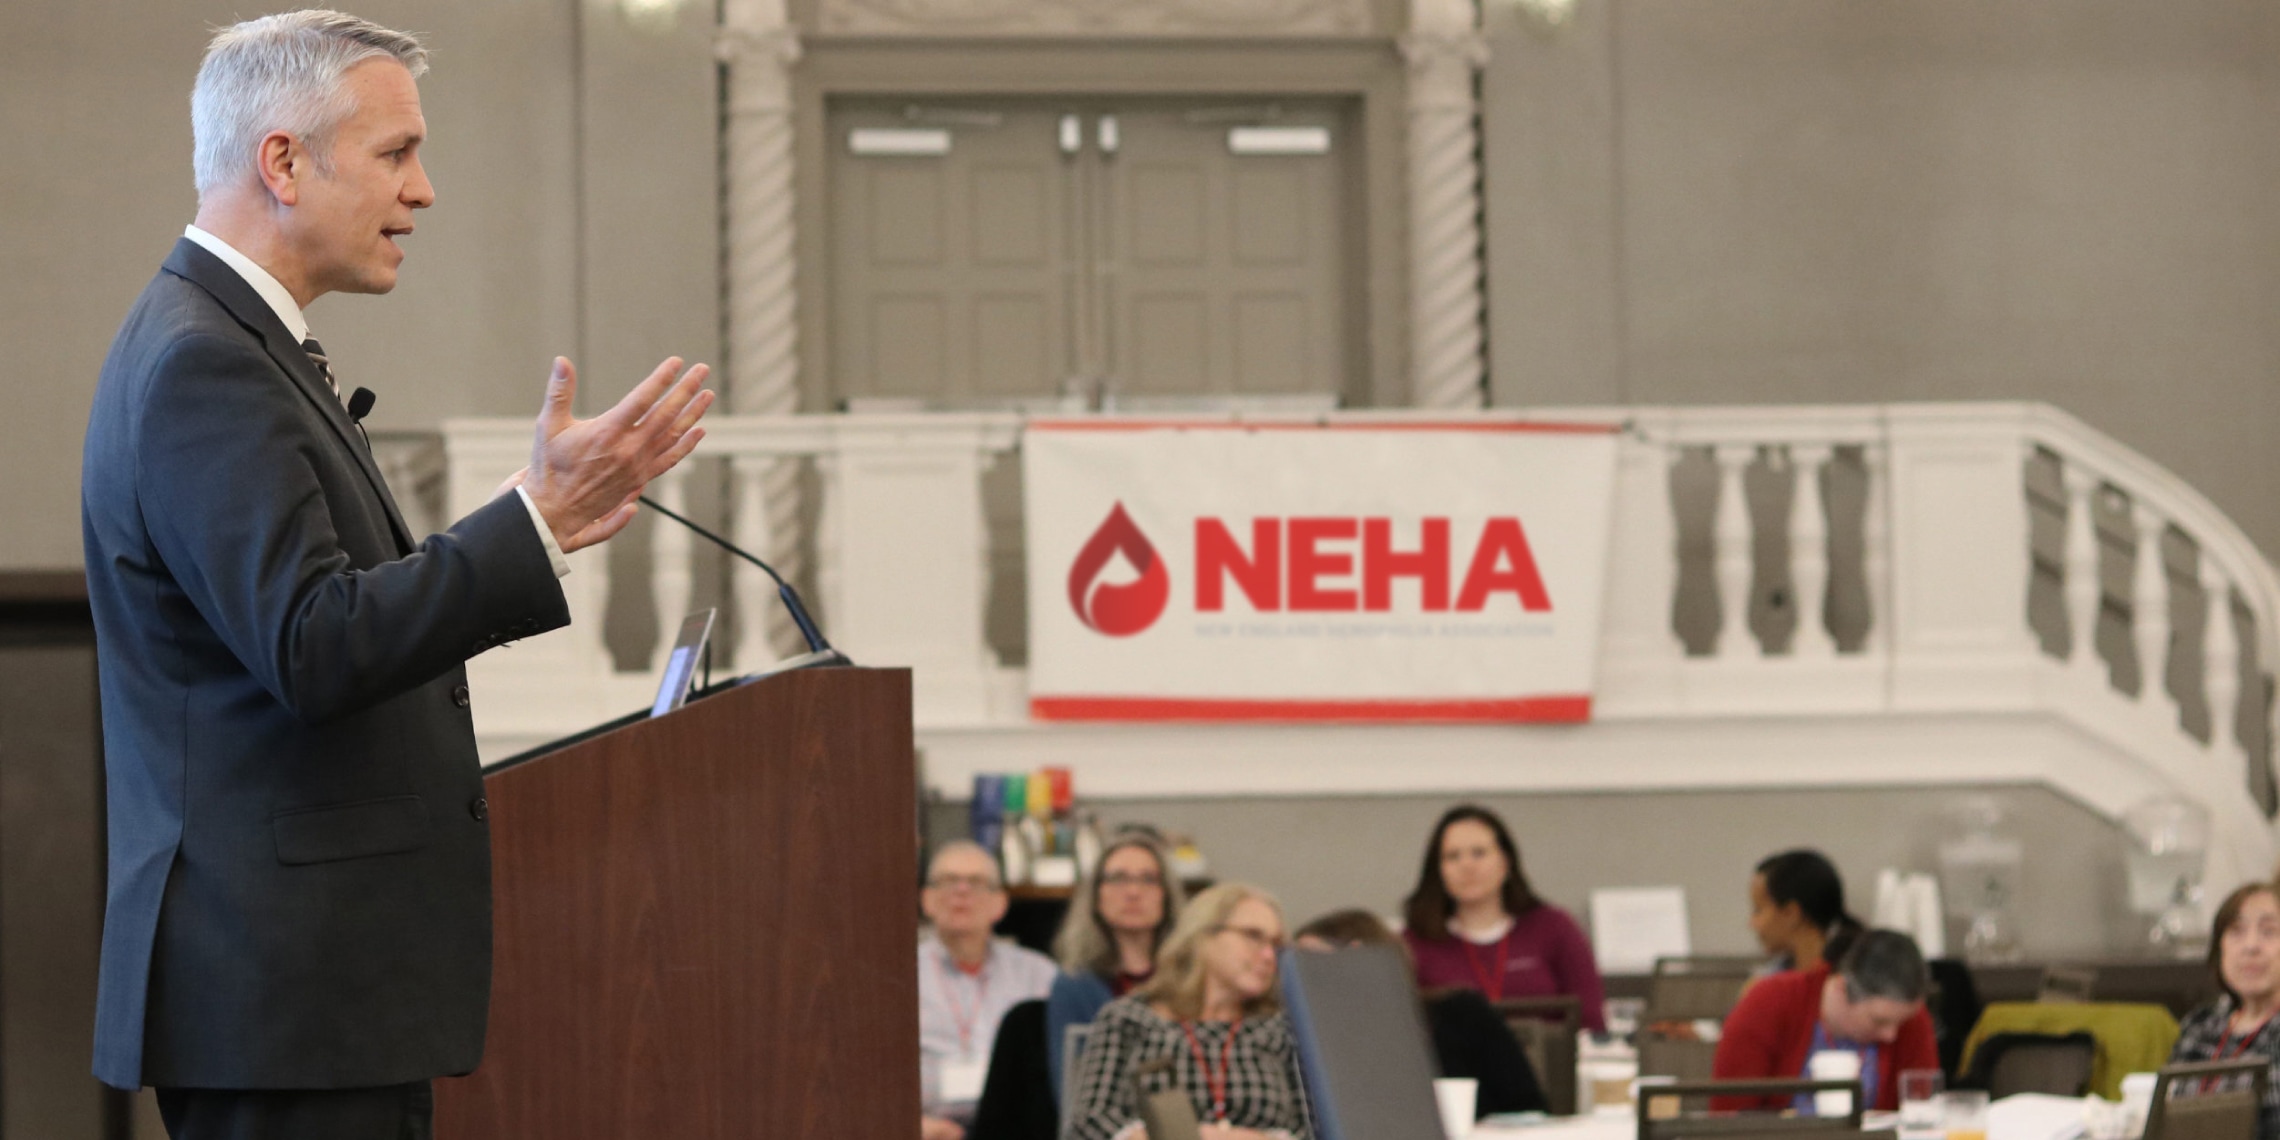 a person giving a speech in a conference room where a banner with Neha's logo can be seen.